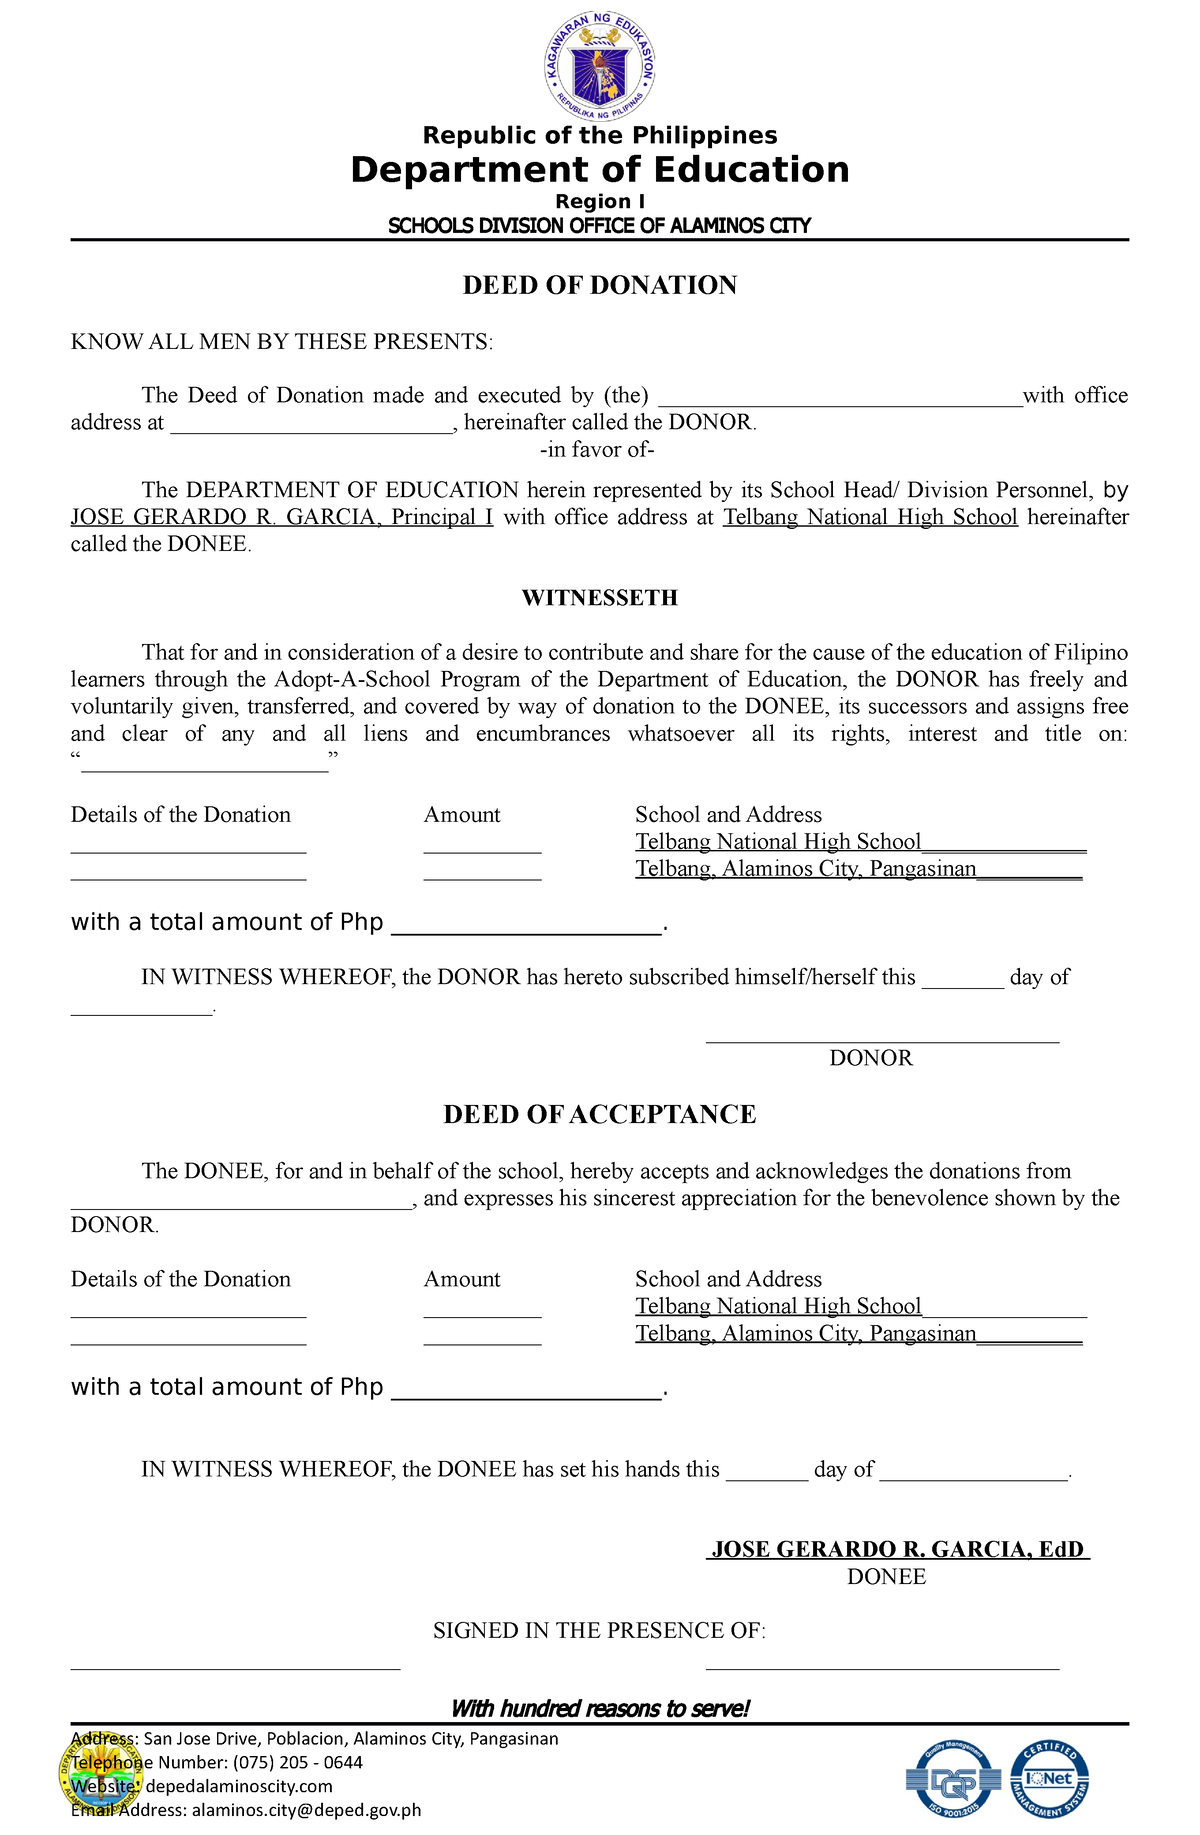 Deed Of Donation And Deed Of Acceptance Template Republic Of The Philippines Department Of 